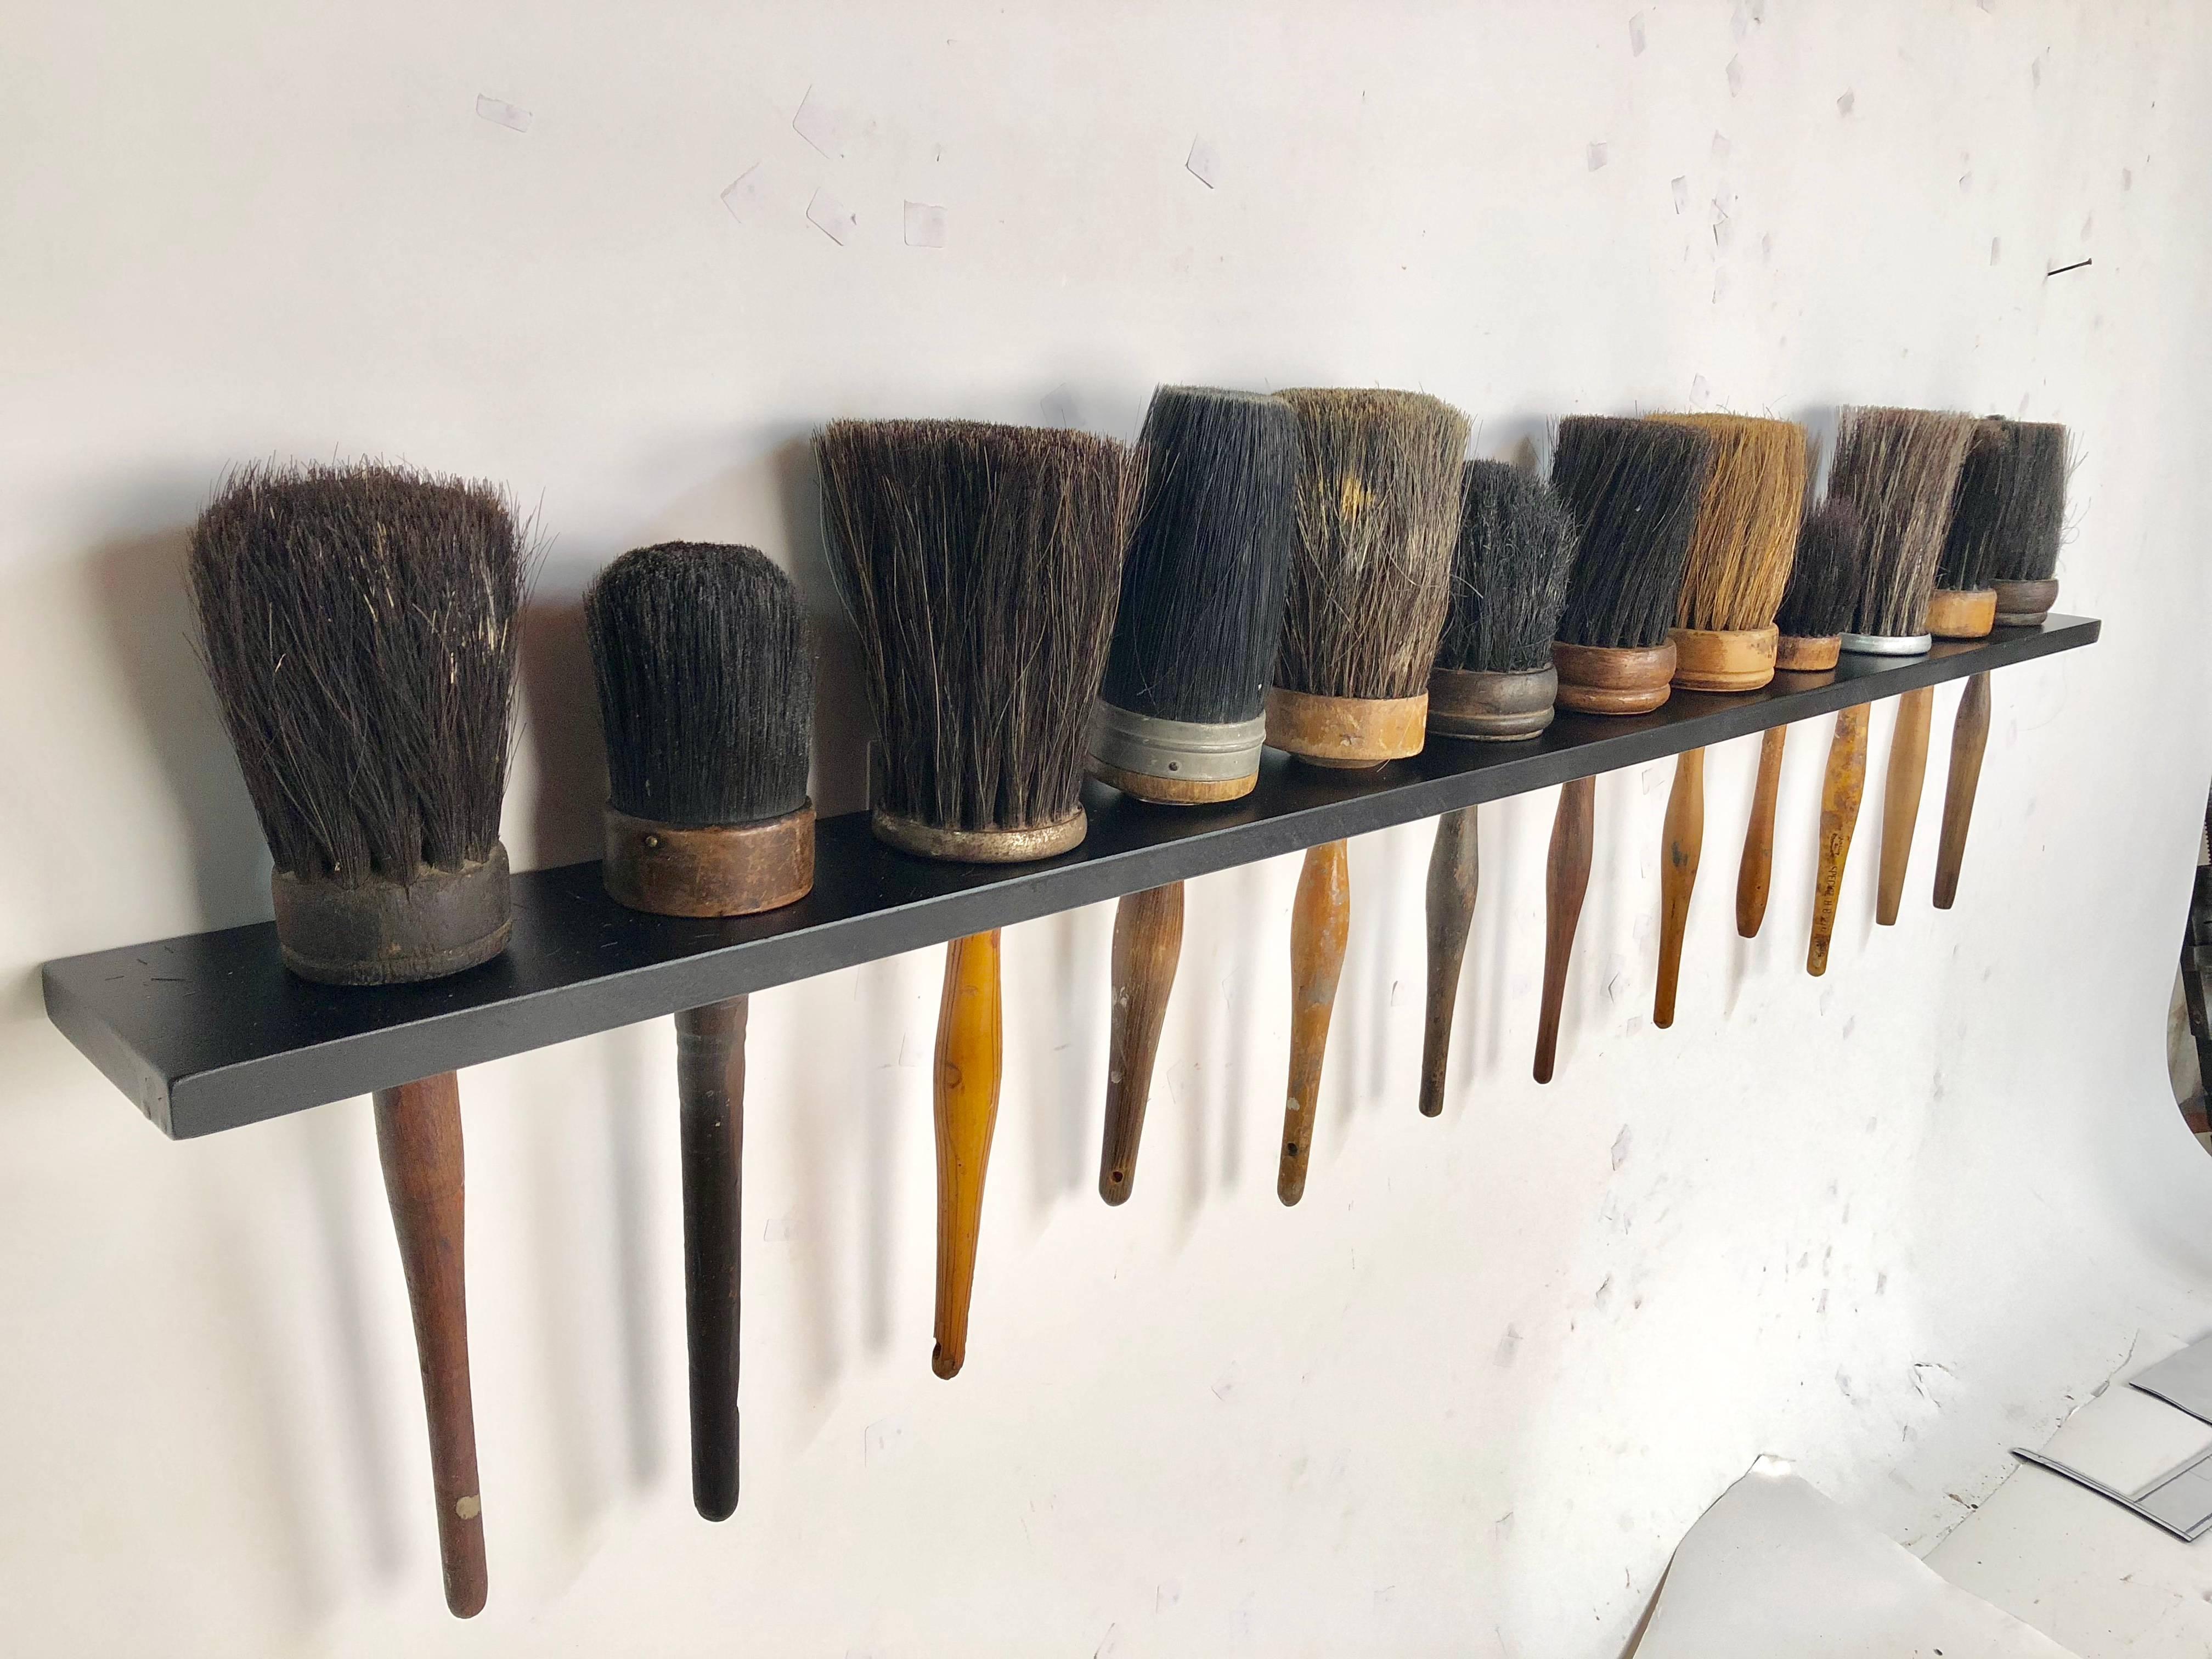 Collection of 12 antique shaker style turned wood handle horse hair brushes mounted in a custom-made black painted oak rack measuring 43 inches wide. The brushes average 13 inches long.